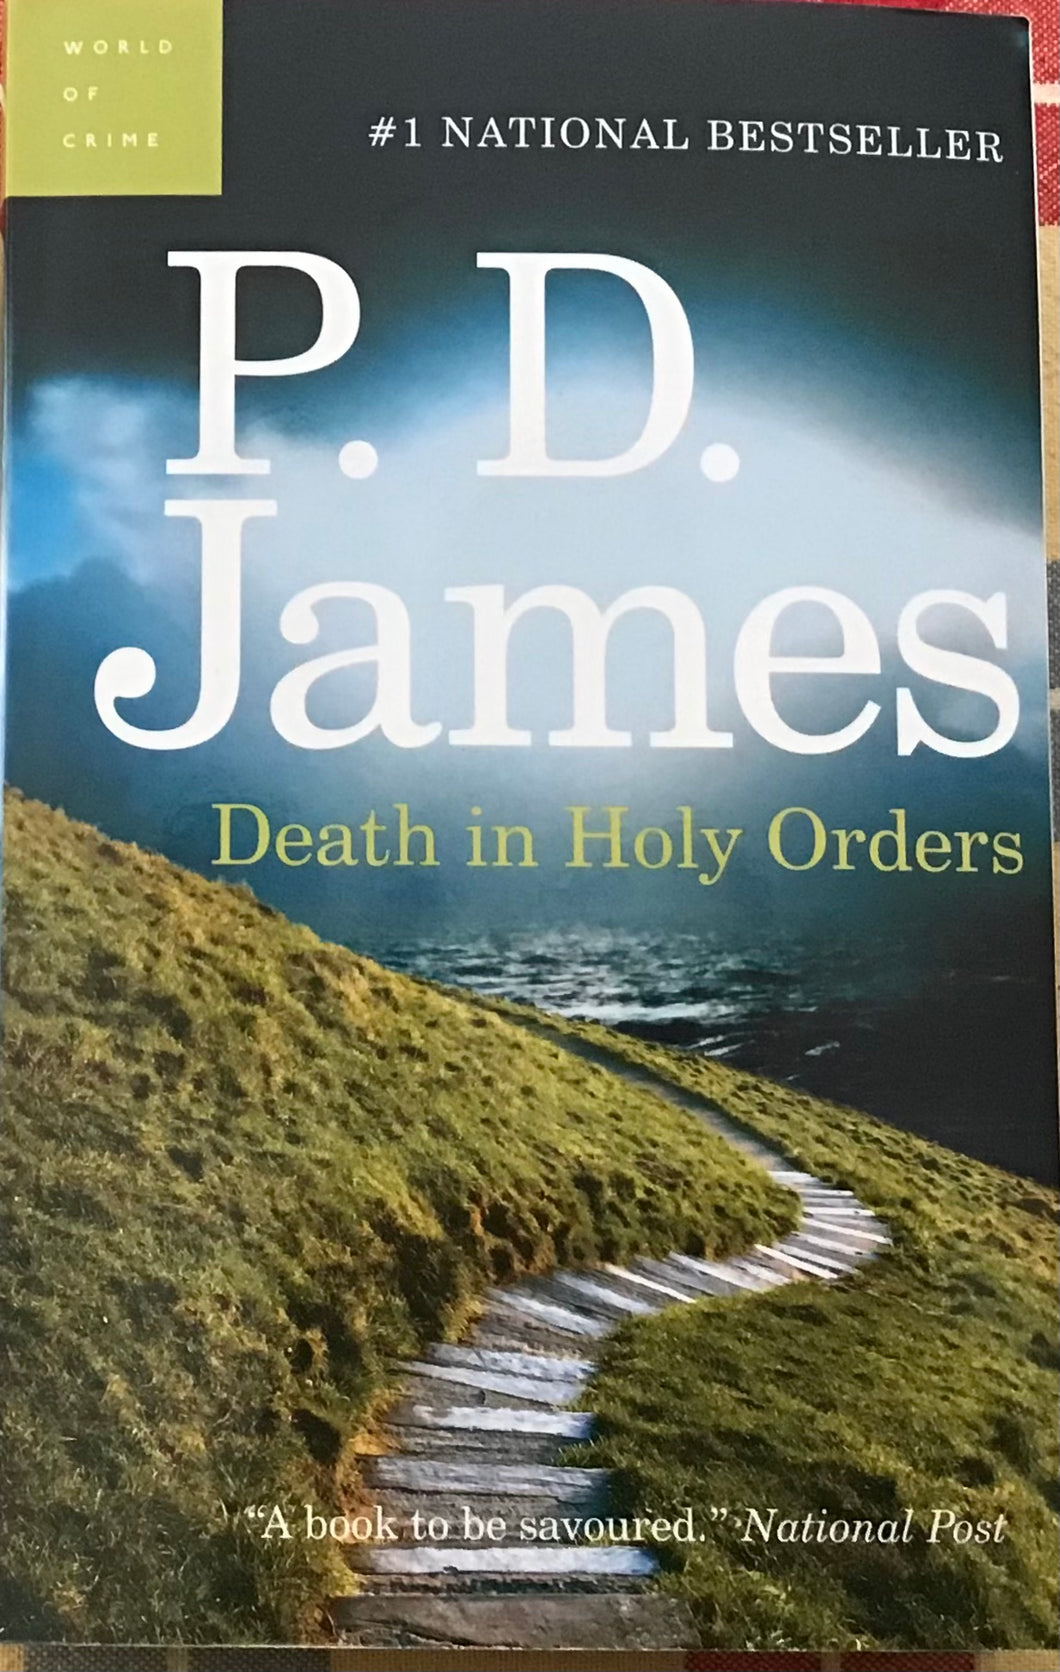 Death In Holy Orders, P.D. James